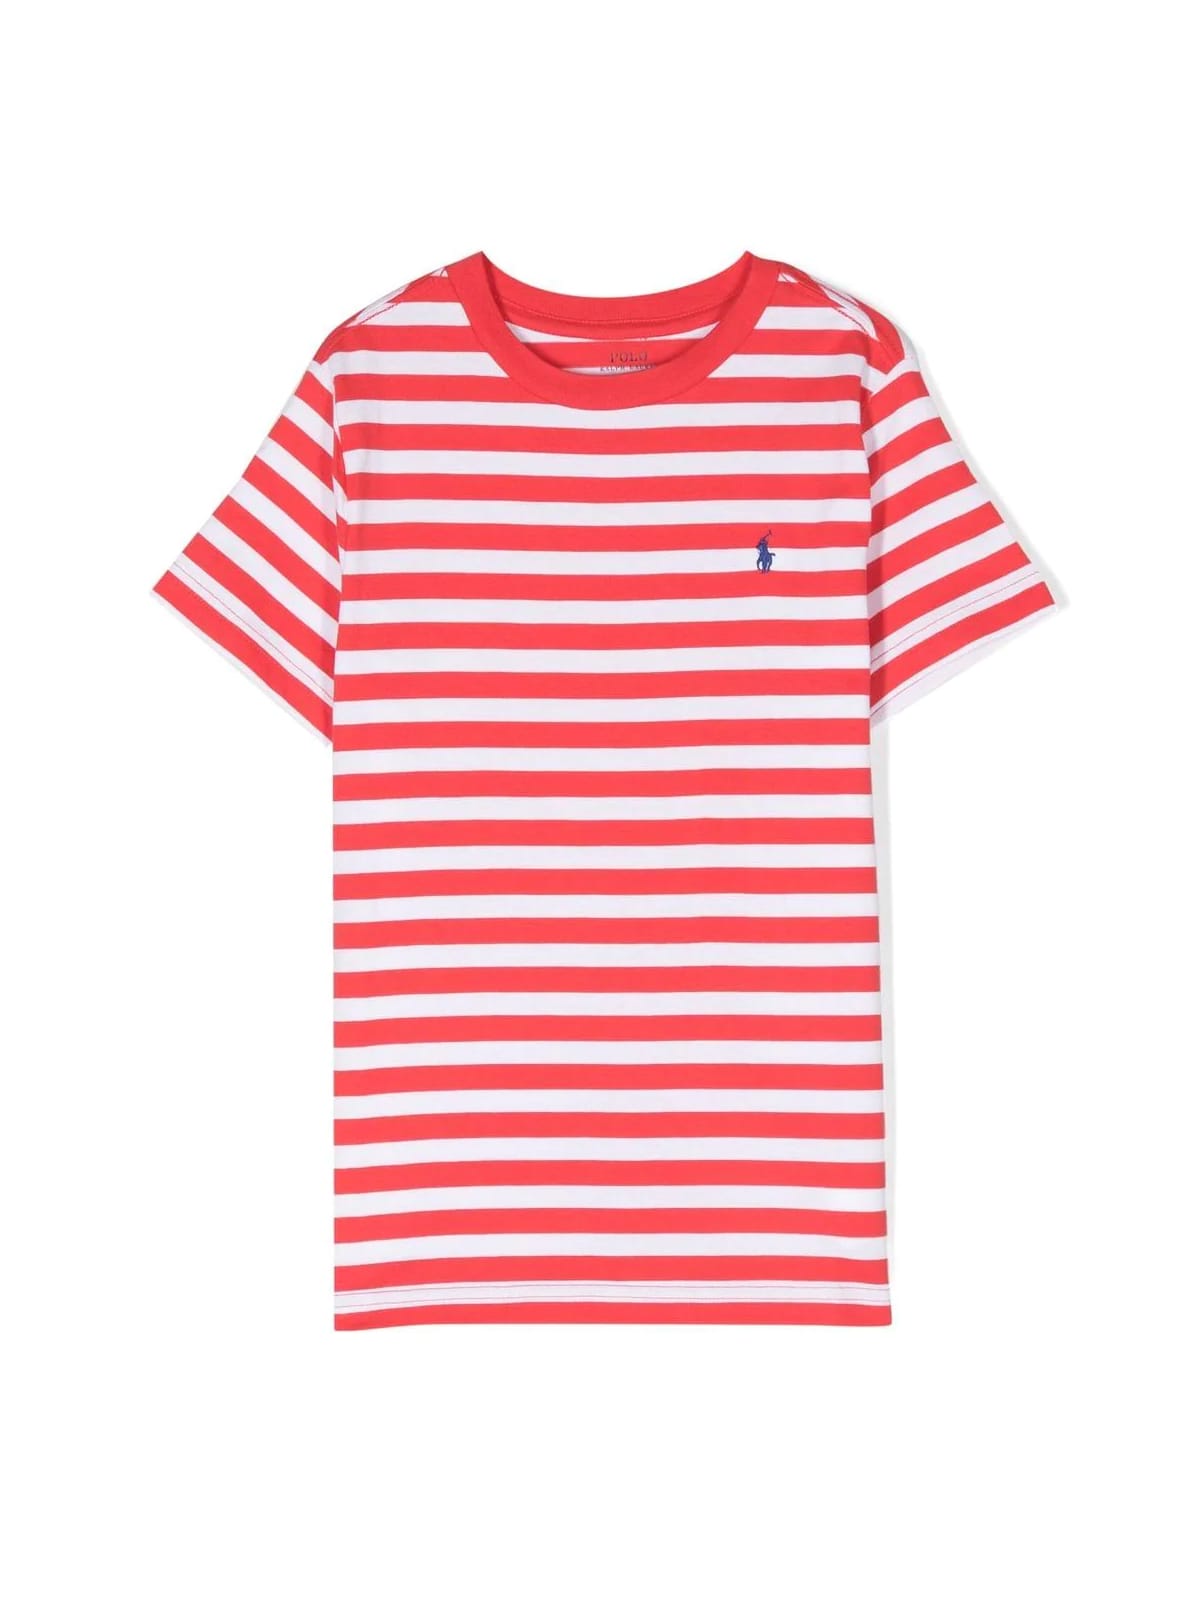 Shop Polo Ralph Lauren Ssydcn M1 Knit Shirts Tshirt In Red Reef White